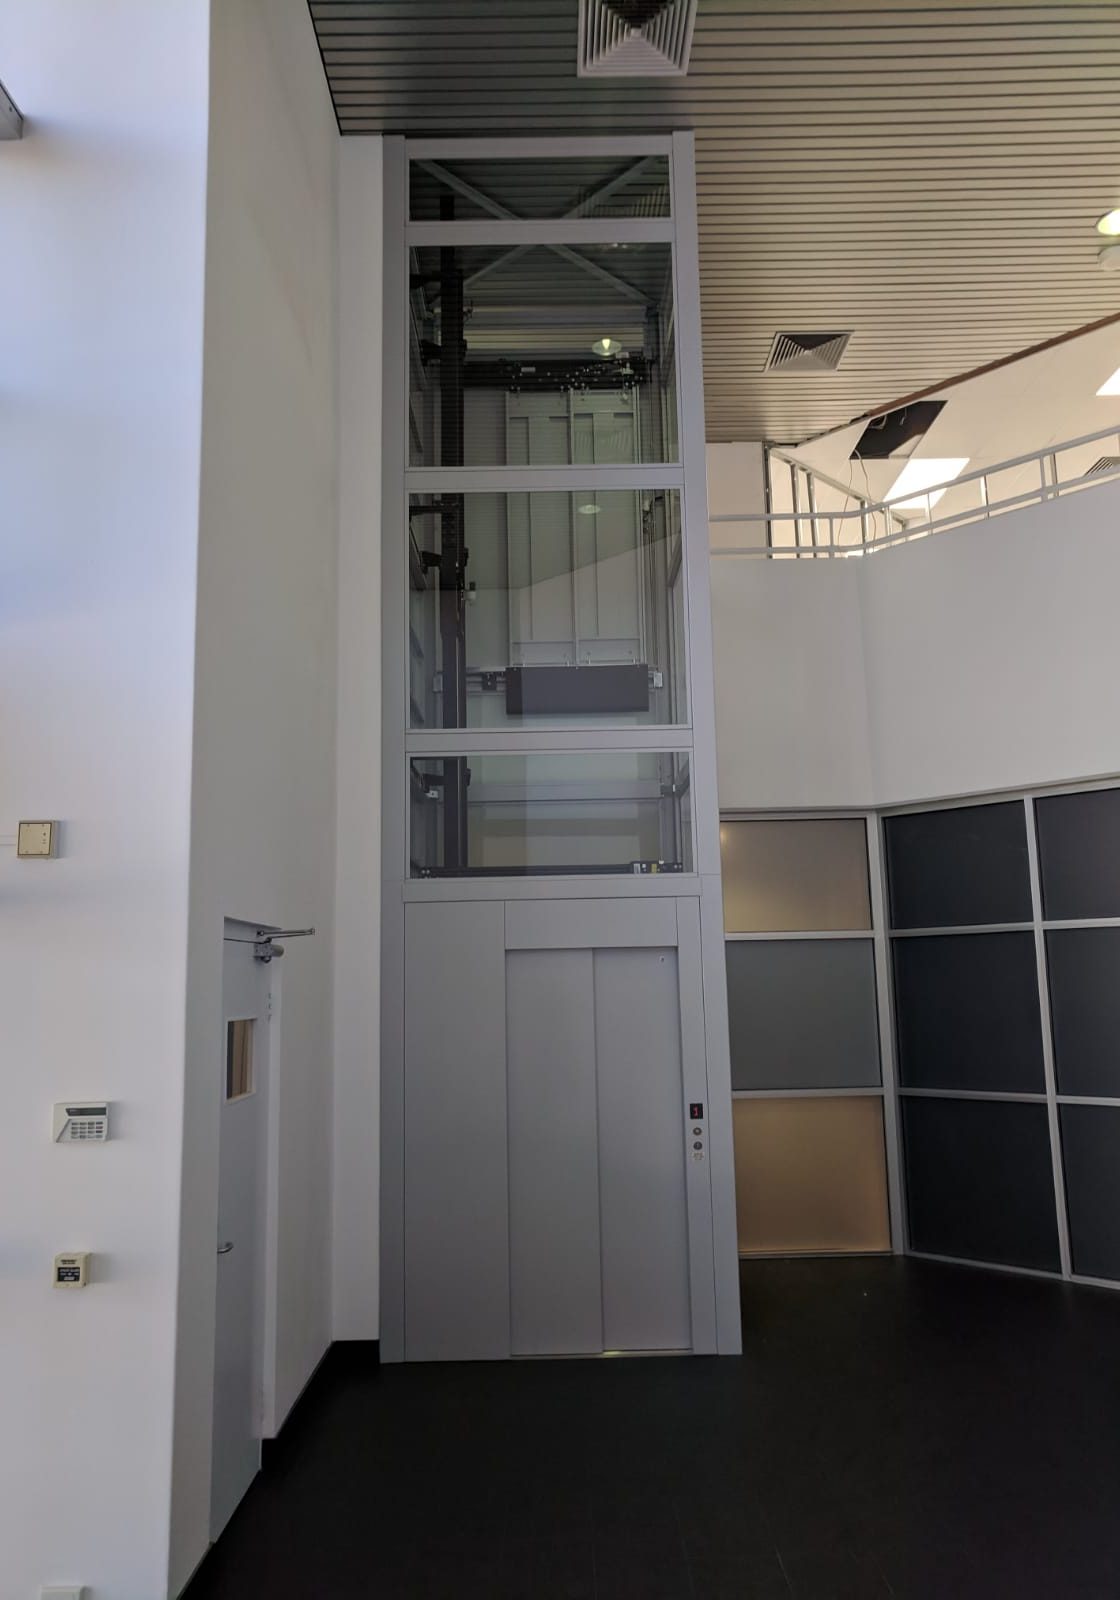 A retrofitted commercial lift in Northbridge.